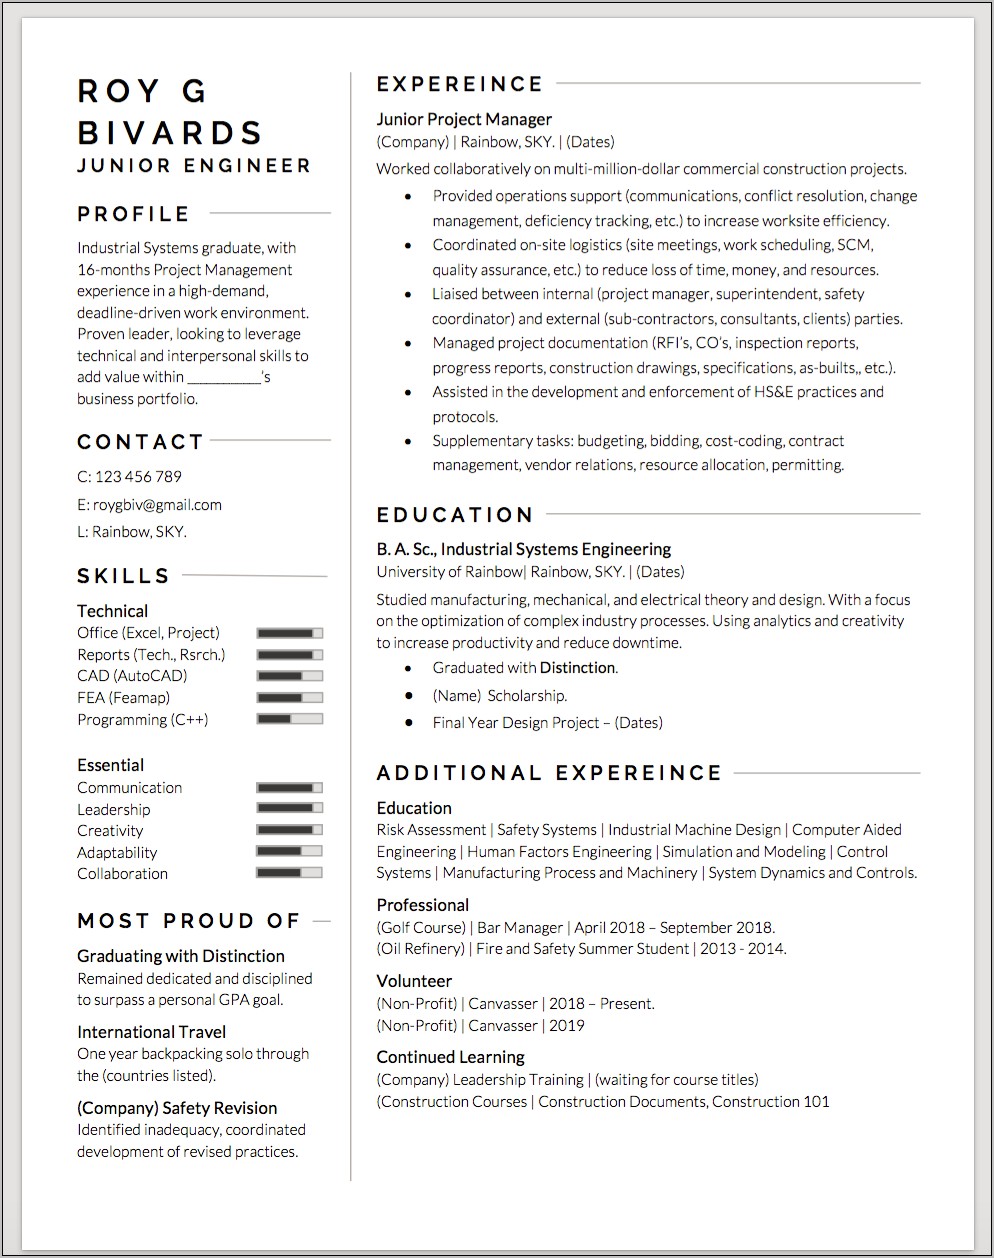 Differentiate School Projects To Work Projects In Resume